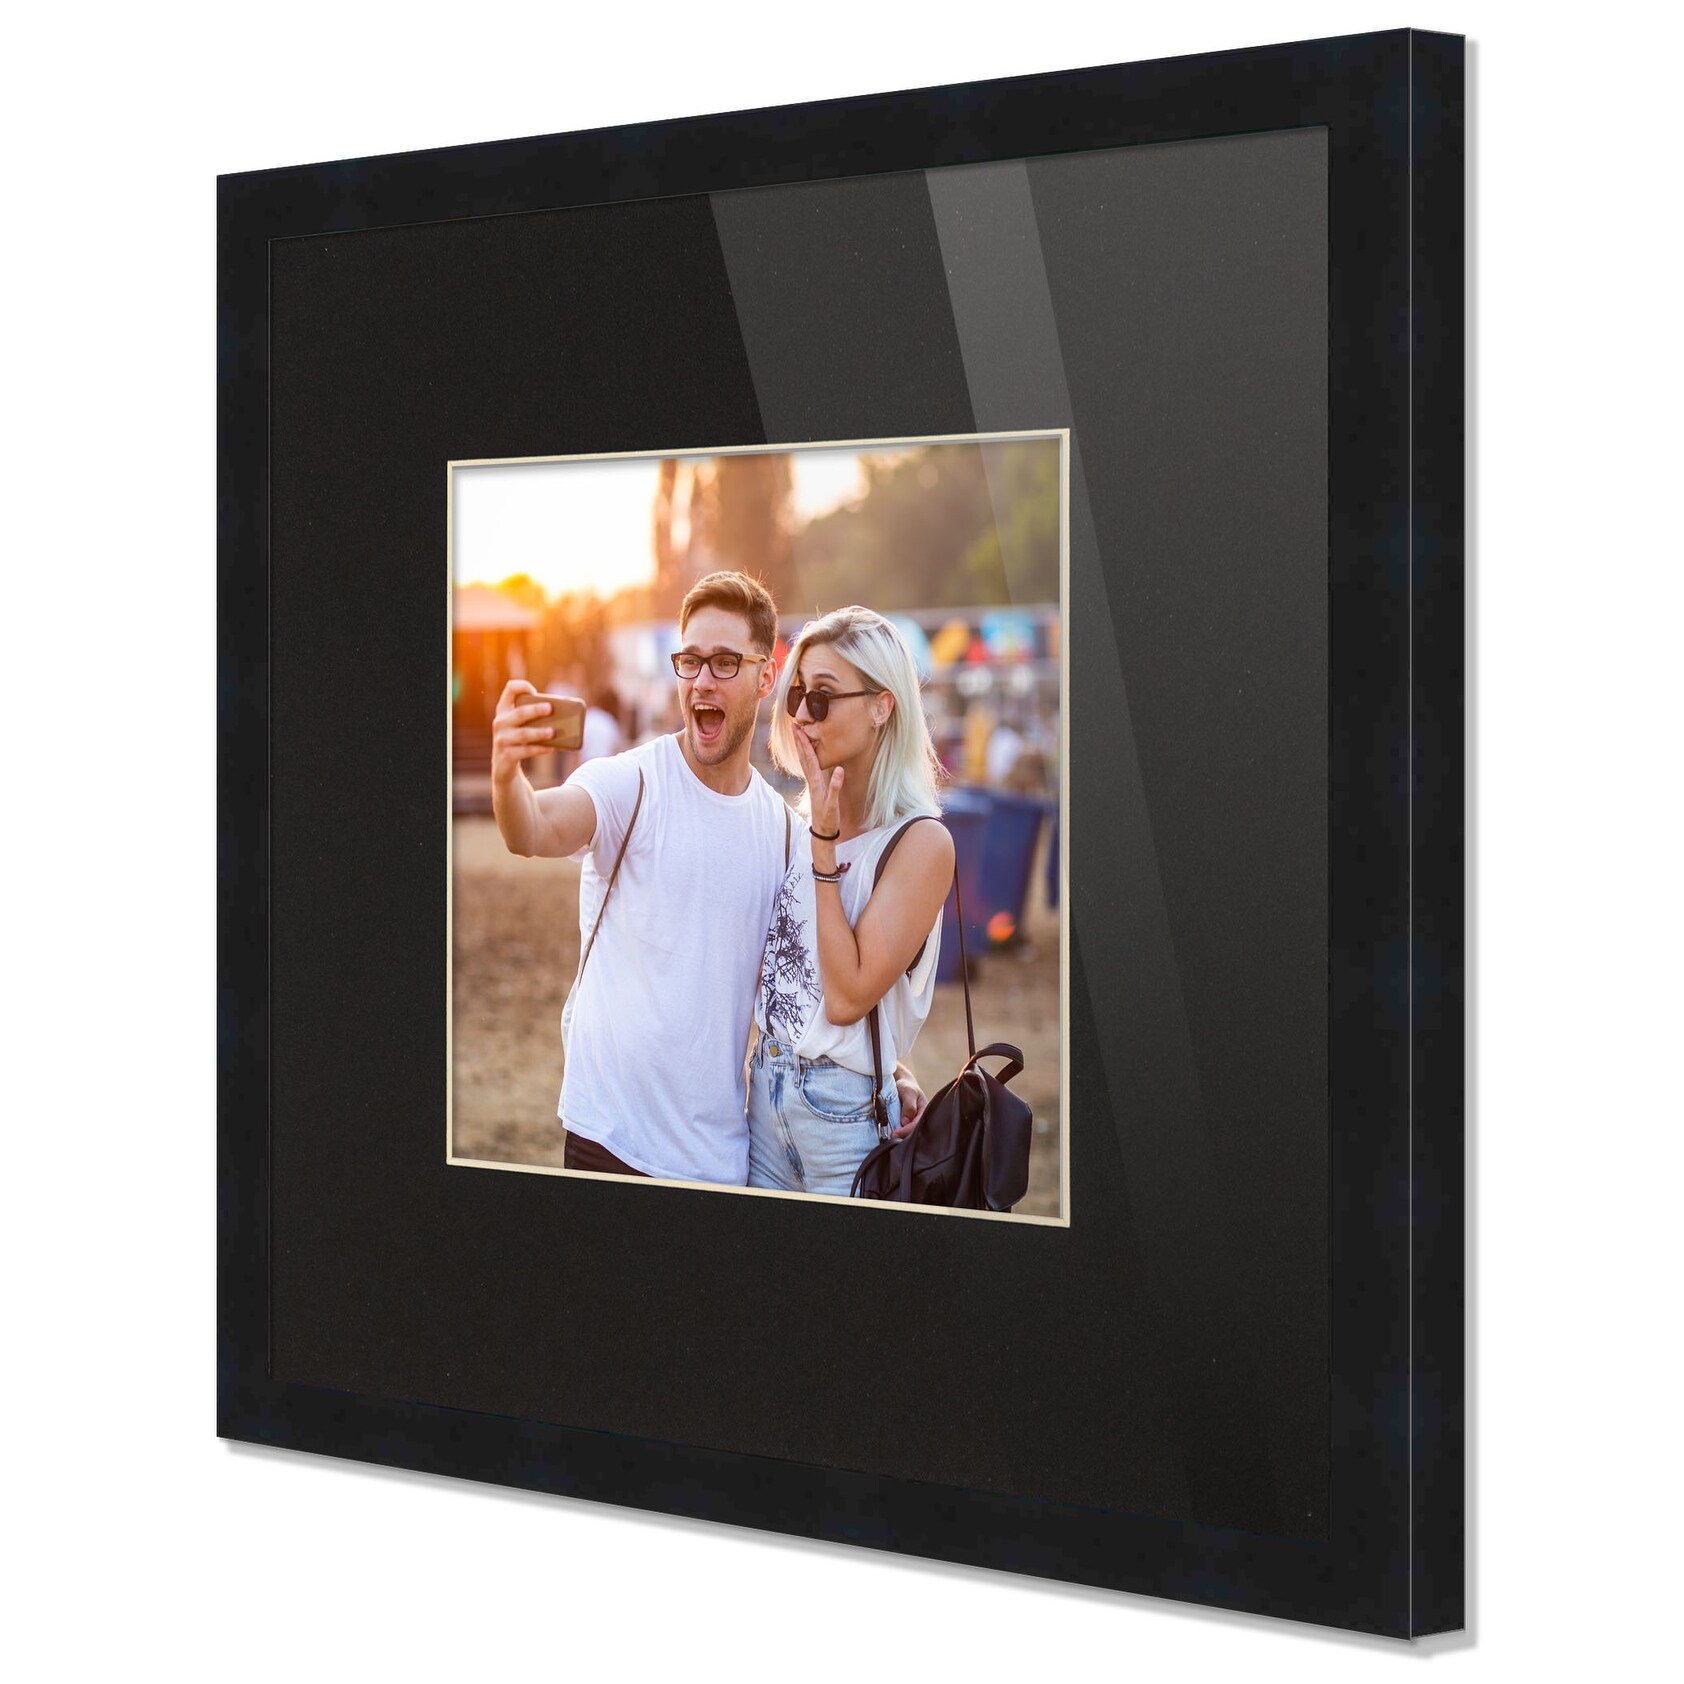 9-Pack, Black, 8x8 Photo Frame (4x4 Matted)